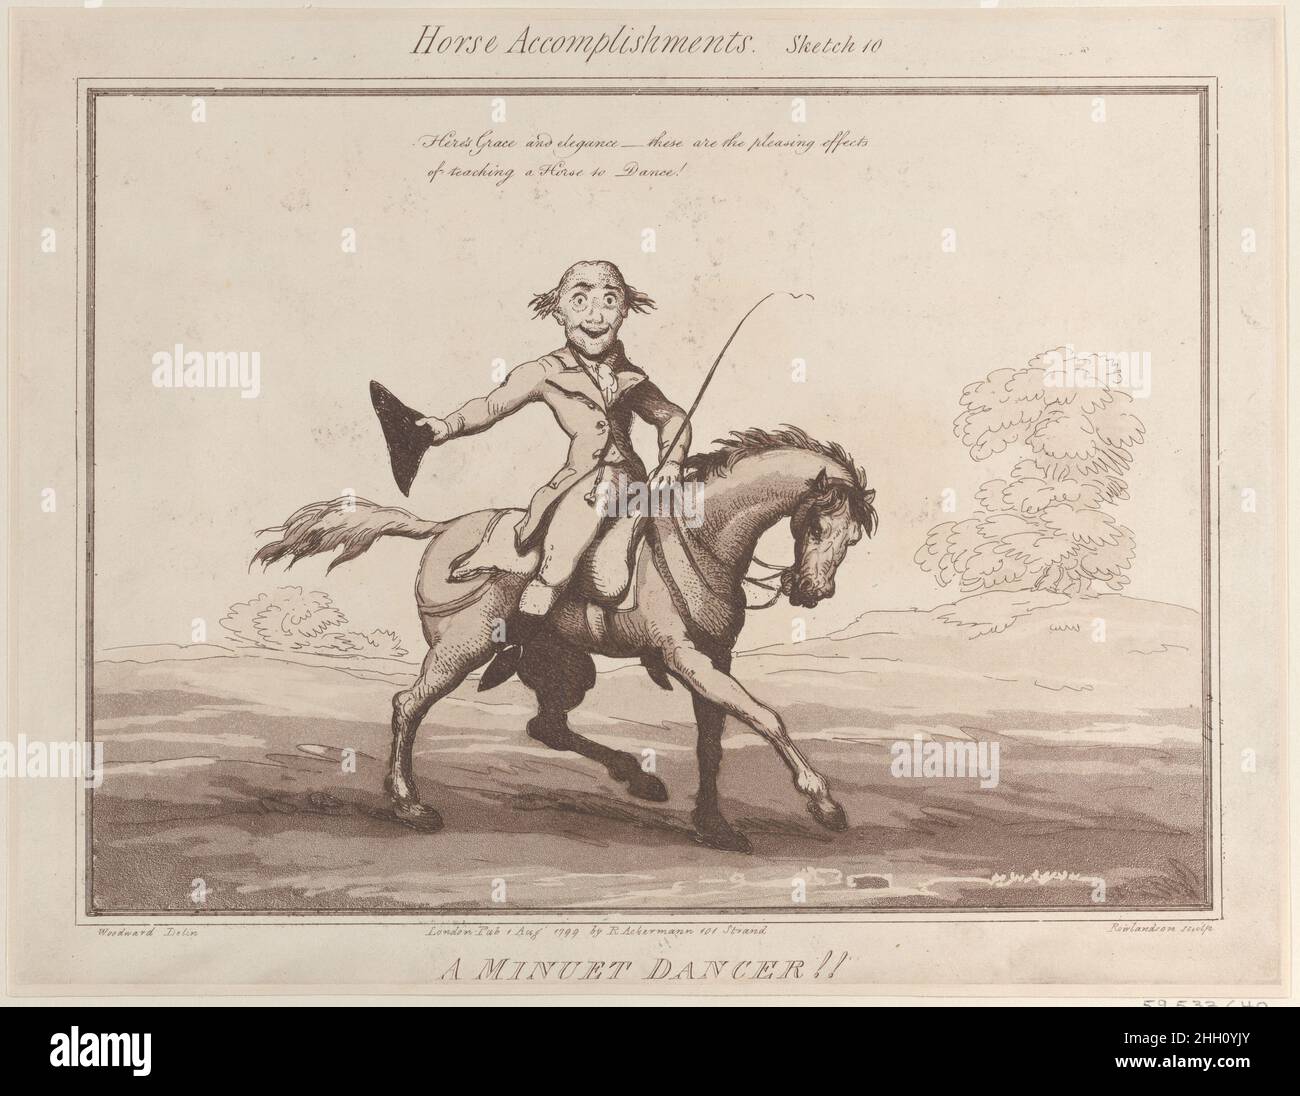 Horse Accomplishments, Sketch 10: A Minuet Dancer !! August 1, 1799 Thomas Rowlandson One of a set of twelve prints that make fun of different sorts of mounts. Here, a man sits on a prancing horse and doffs his hat. Text above reads: 'Here's Grace and elegance–these are the pleasing effects of teaching a Horse to Dance!. Horse Accomplishments, Sketch 10: A Minuet Dancer !!. Horse Accomplishments. After George Murgatroyd Woodward (British, 1765–1809 London). August 1, 1799. Etching and aquatint. Rudolph Ackermann, London (active 1794–1829). Prints Stock Photo